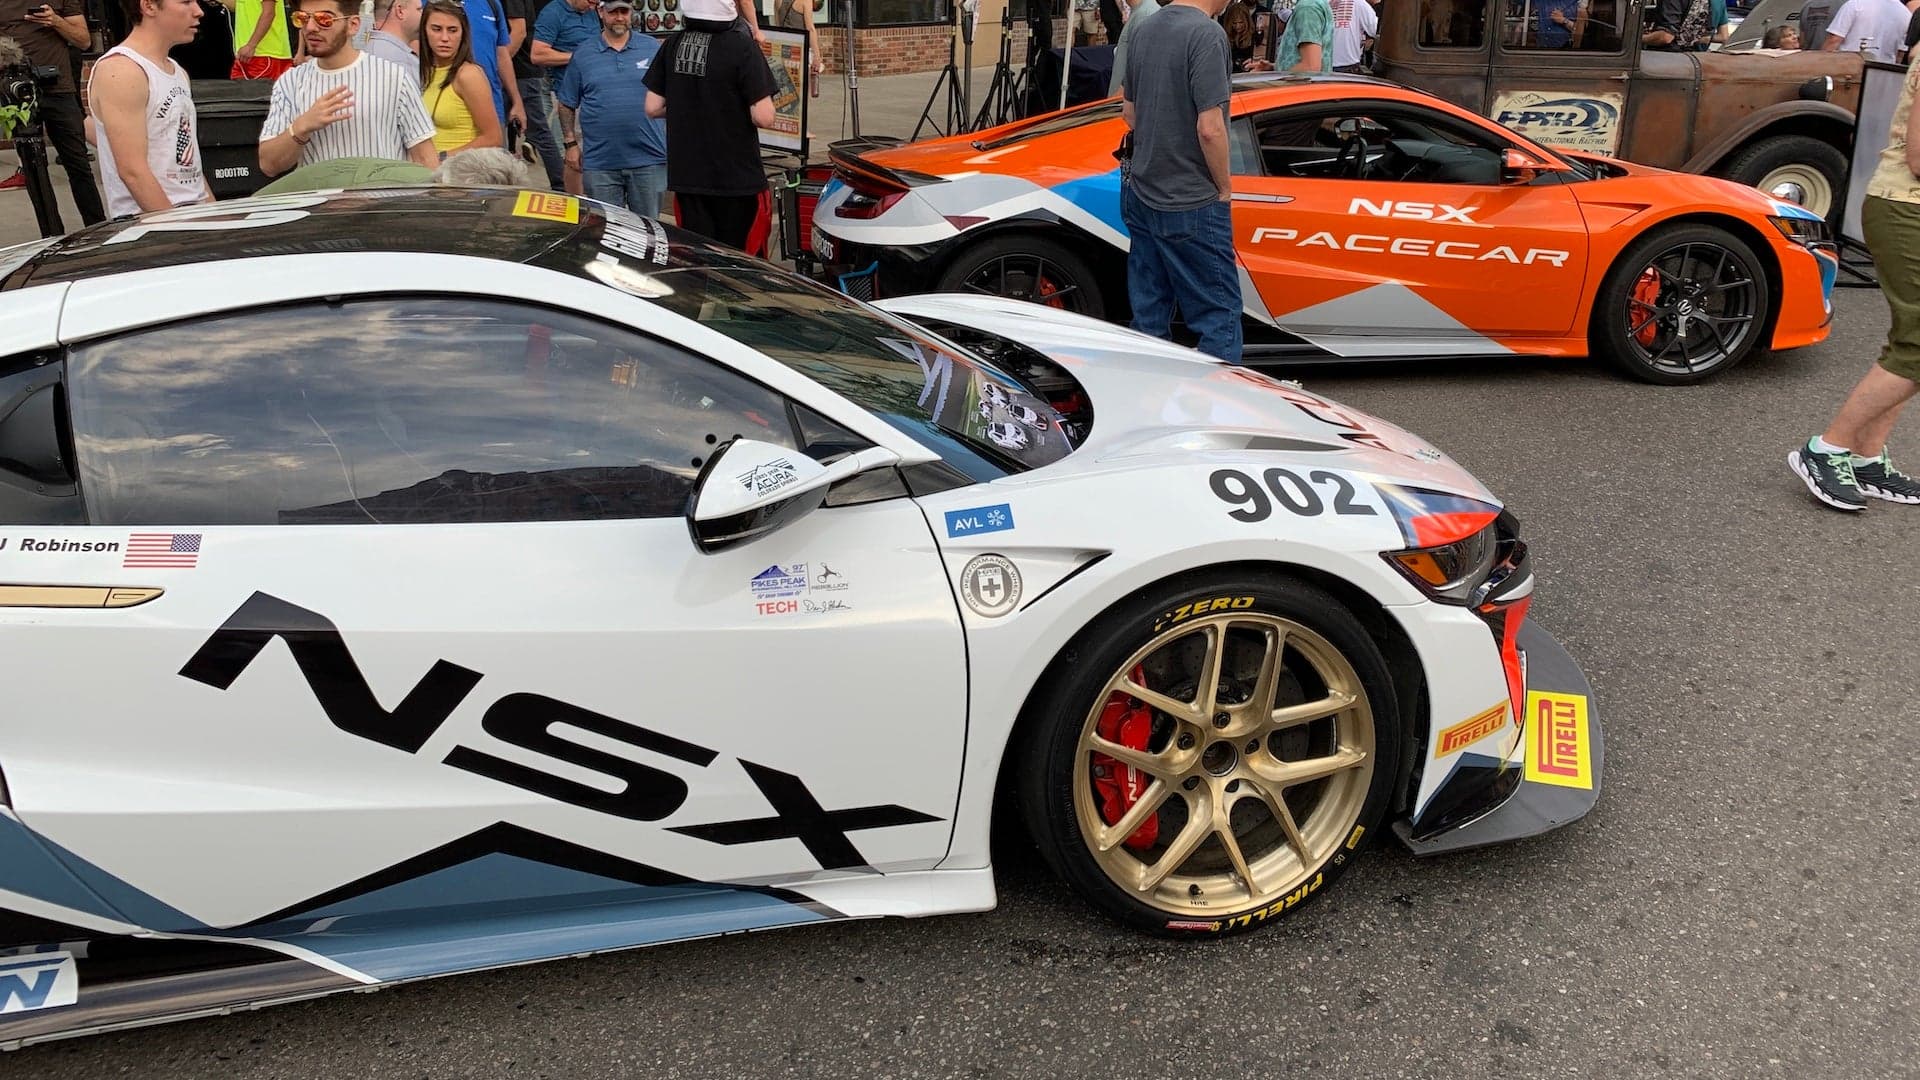 The Coolest Cars of Pikes Peak International Hill Climb: Day 1